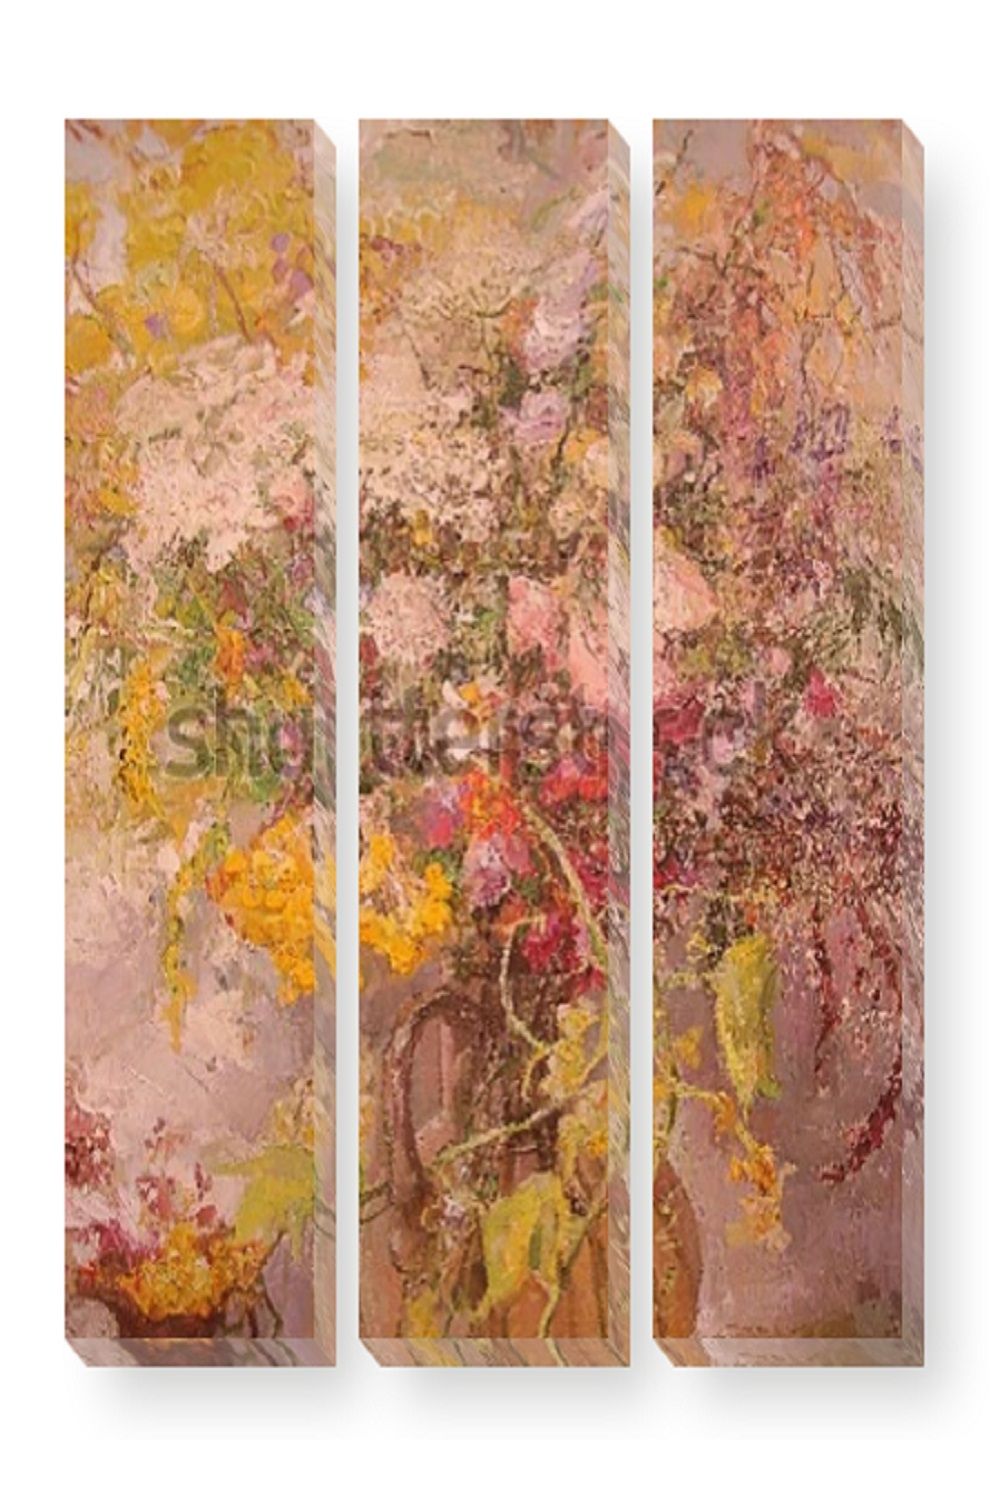 Impressionist wall art painting divided into a 3-panel triptych